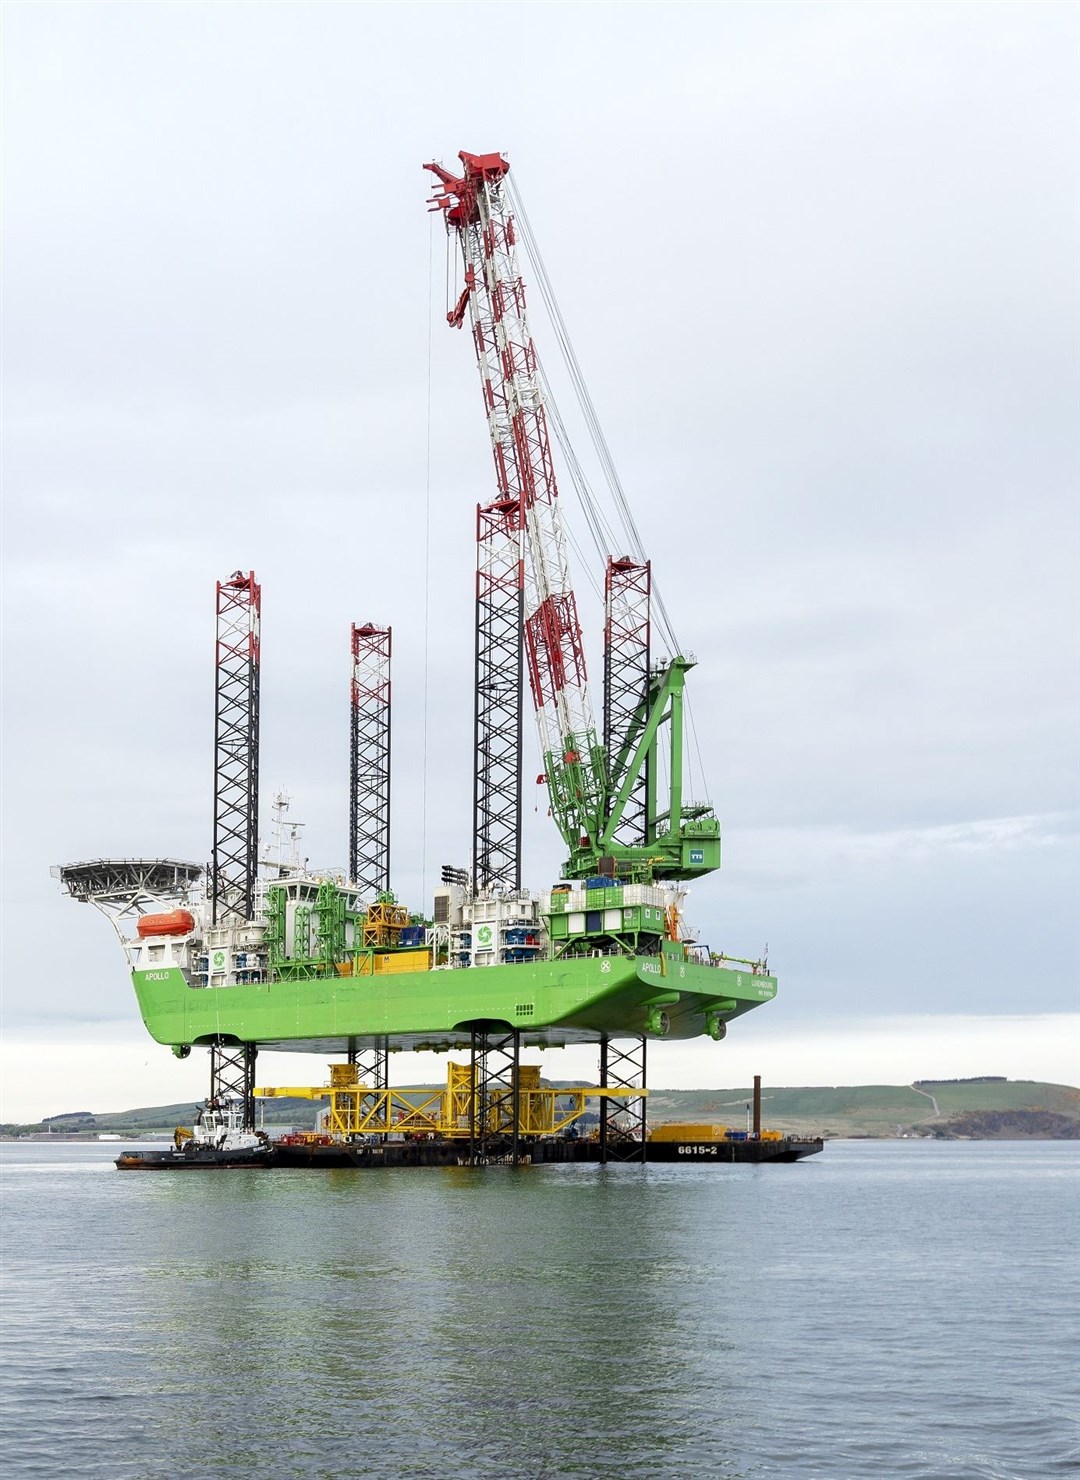 Offshore supply vessel Apollo in the Cromarty Firth . Image by: Malcolm McCurrach